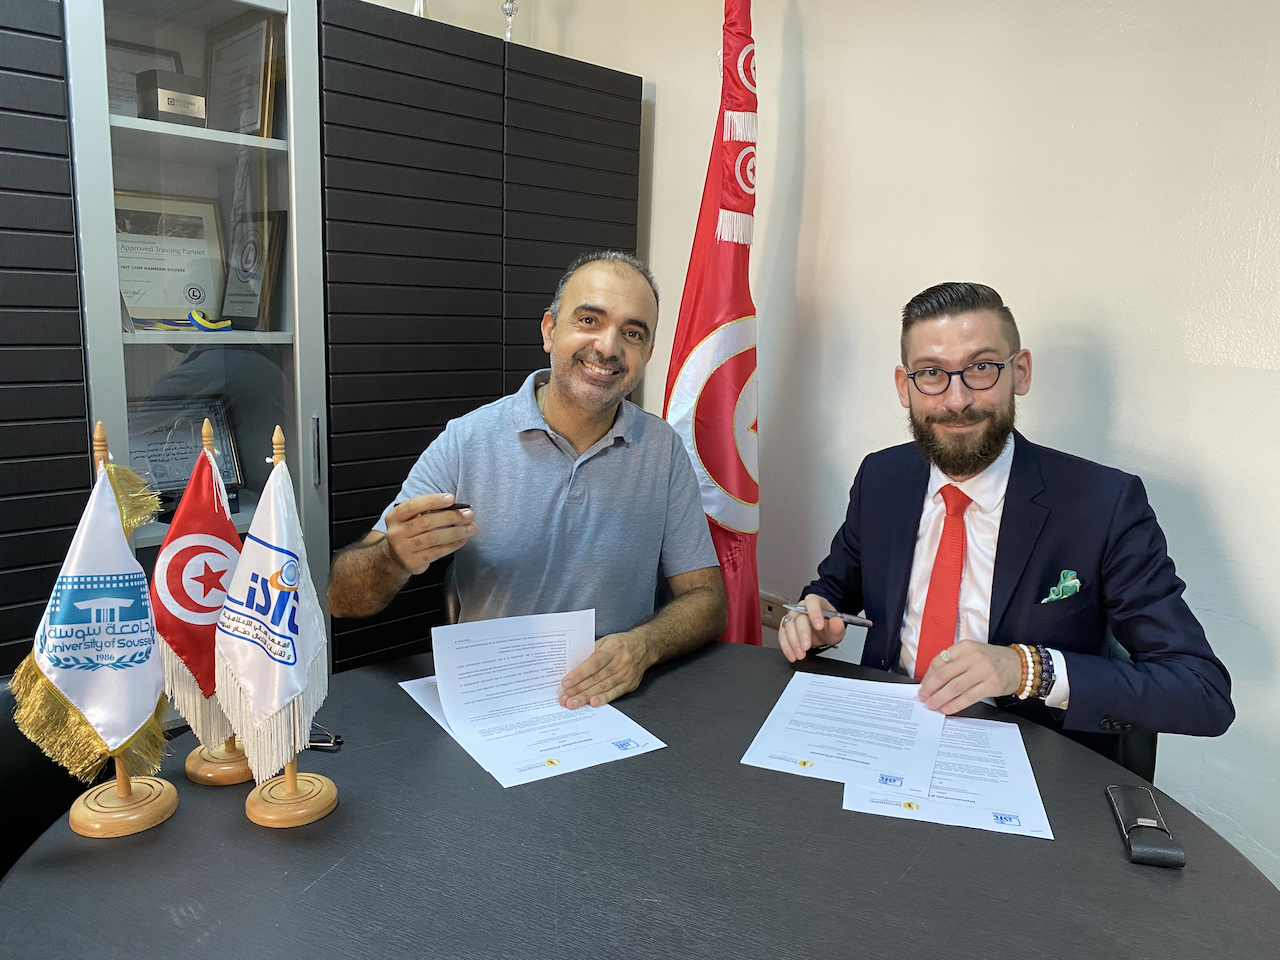 The Director Ouajdi KORBAA and the President Sébastien DHÉRINES, signing the Partnership Agreement, on 6 October 2022 at ISITCom Sousse.